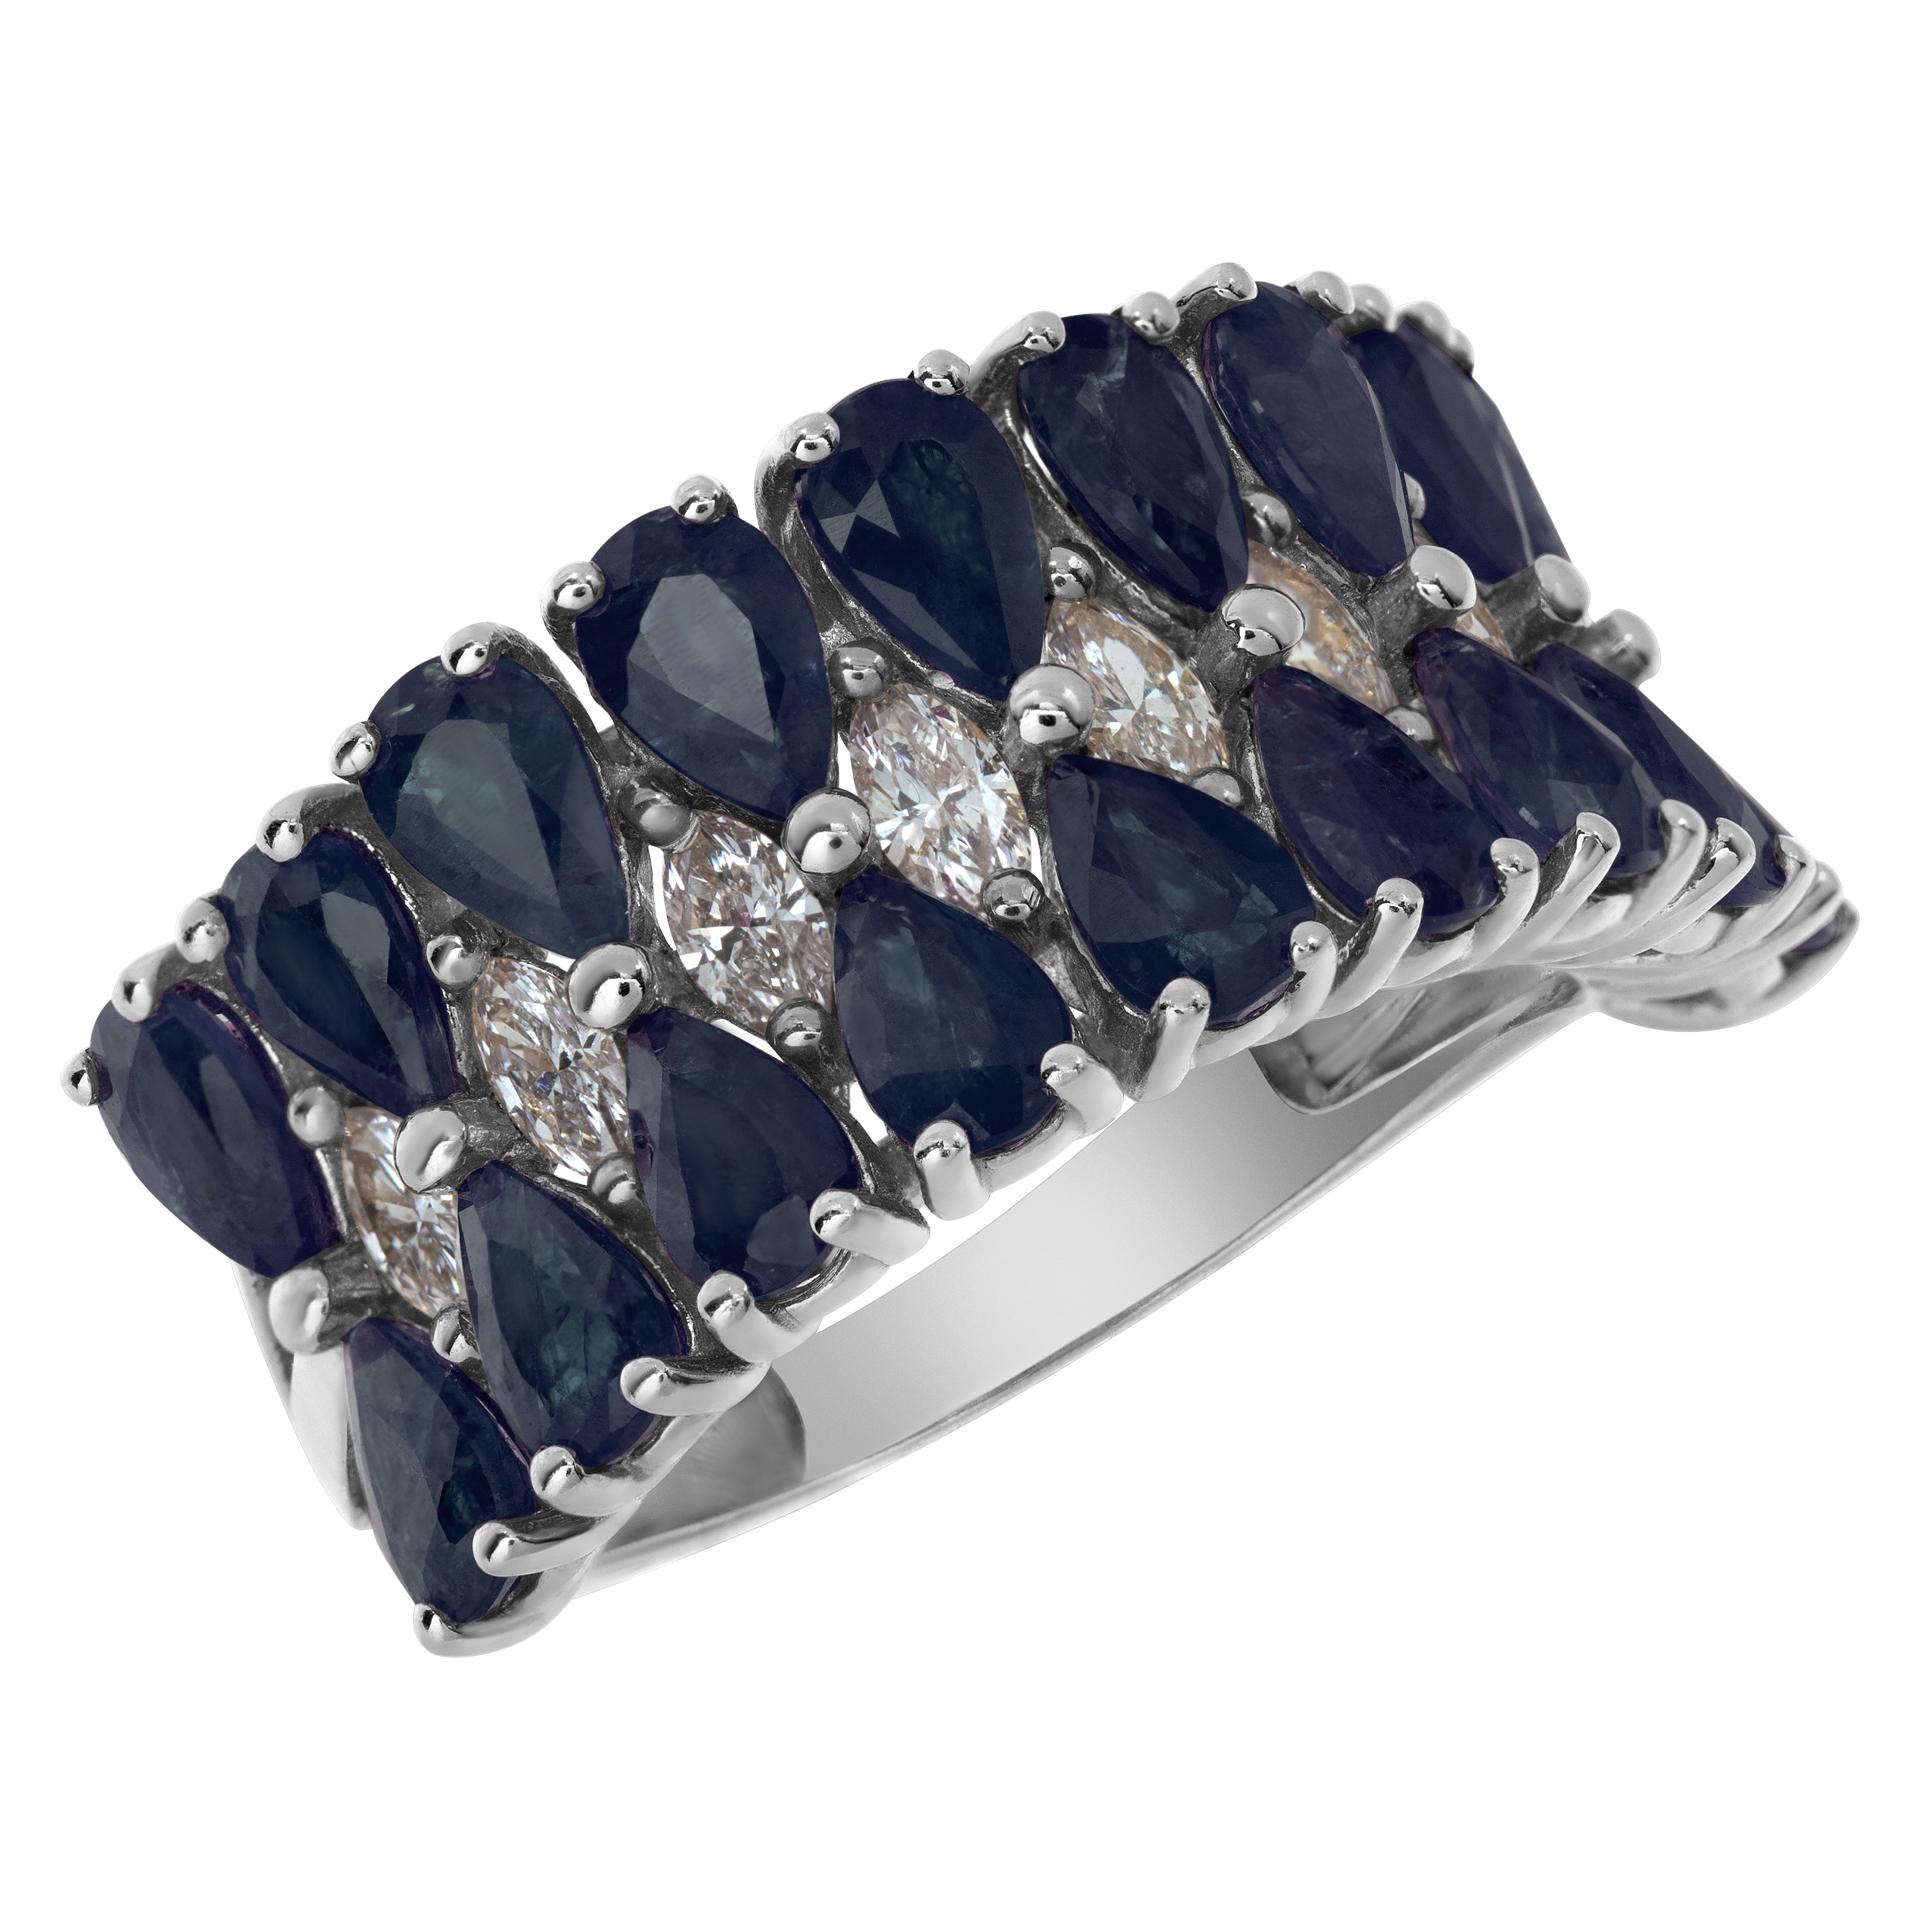 White gold ring w/ approx 0.80 cts of marquise cut diamonds and sapphires In Excellent Condition For Sale In Surfside, FL